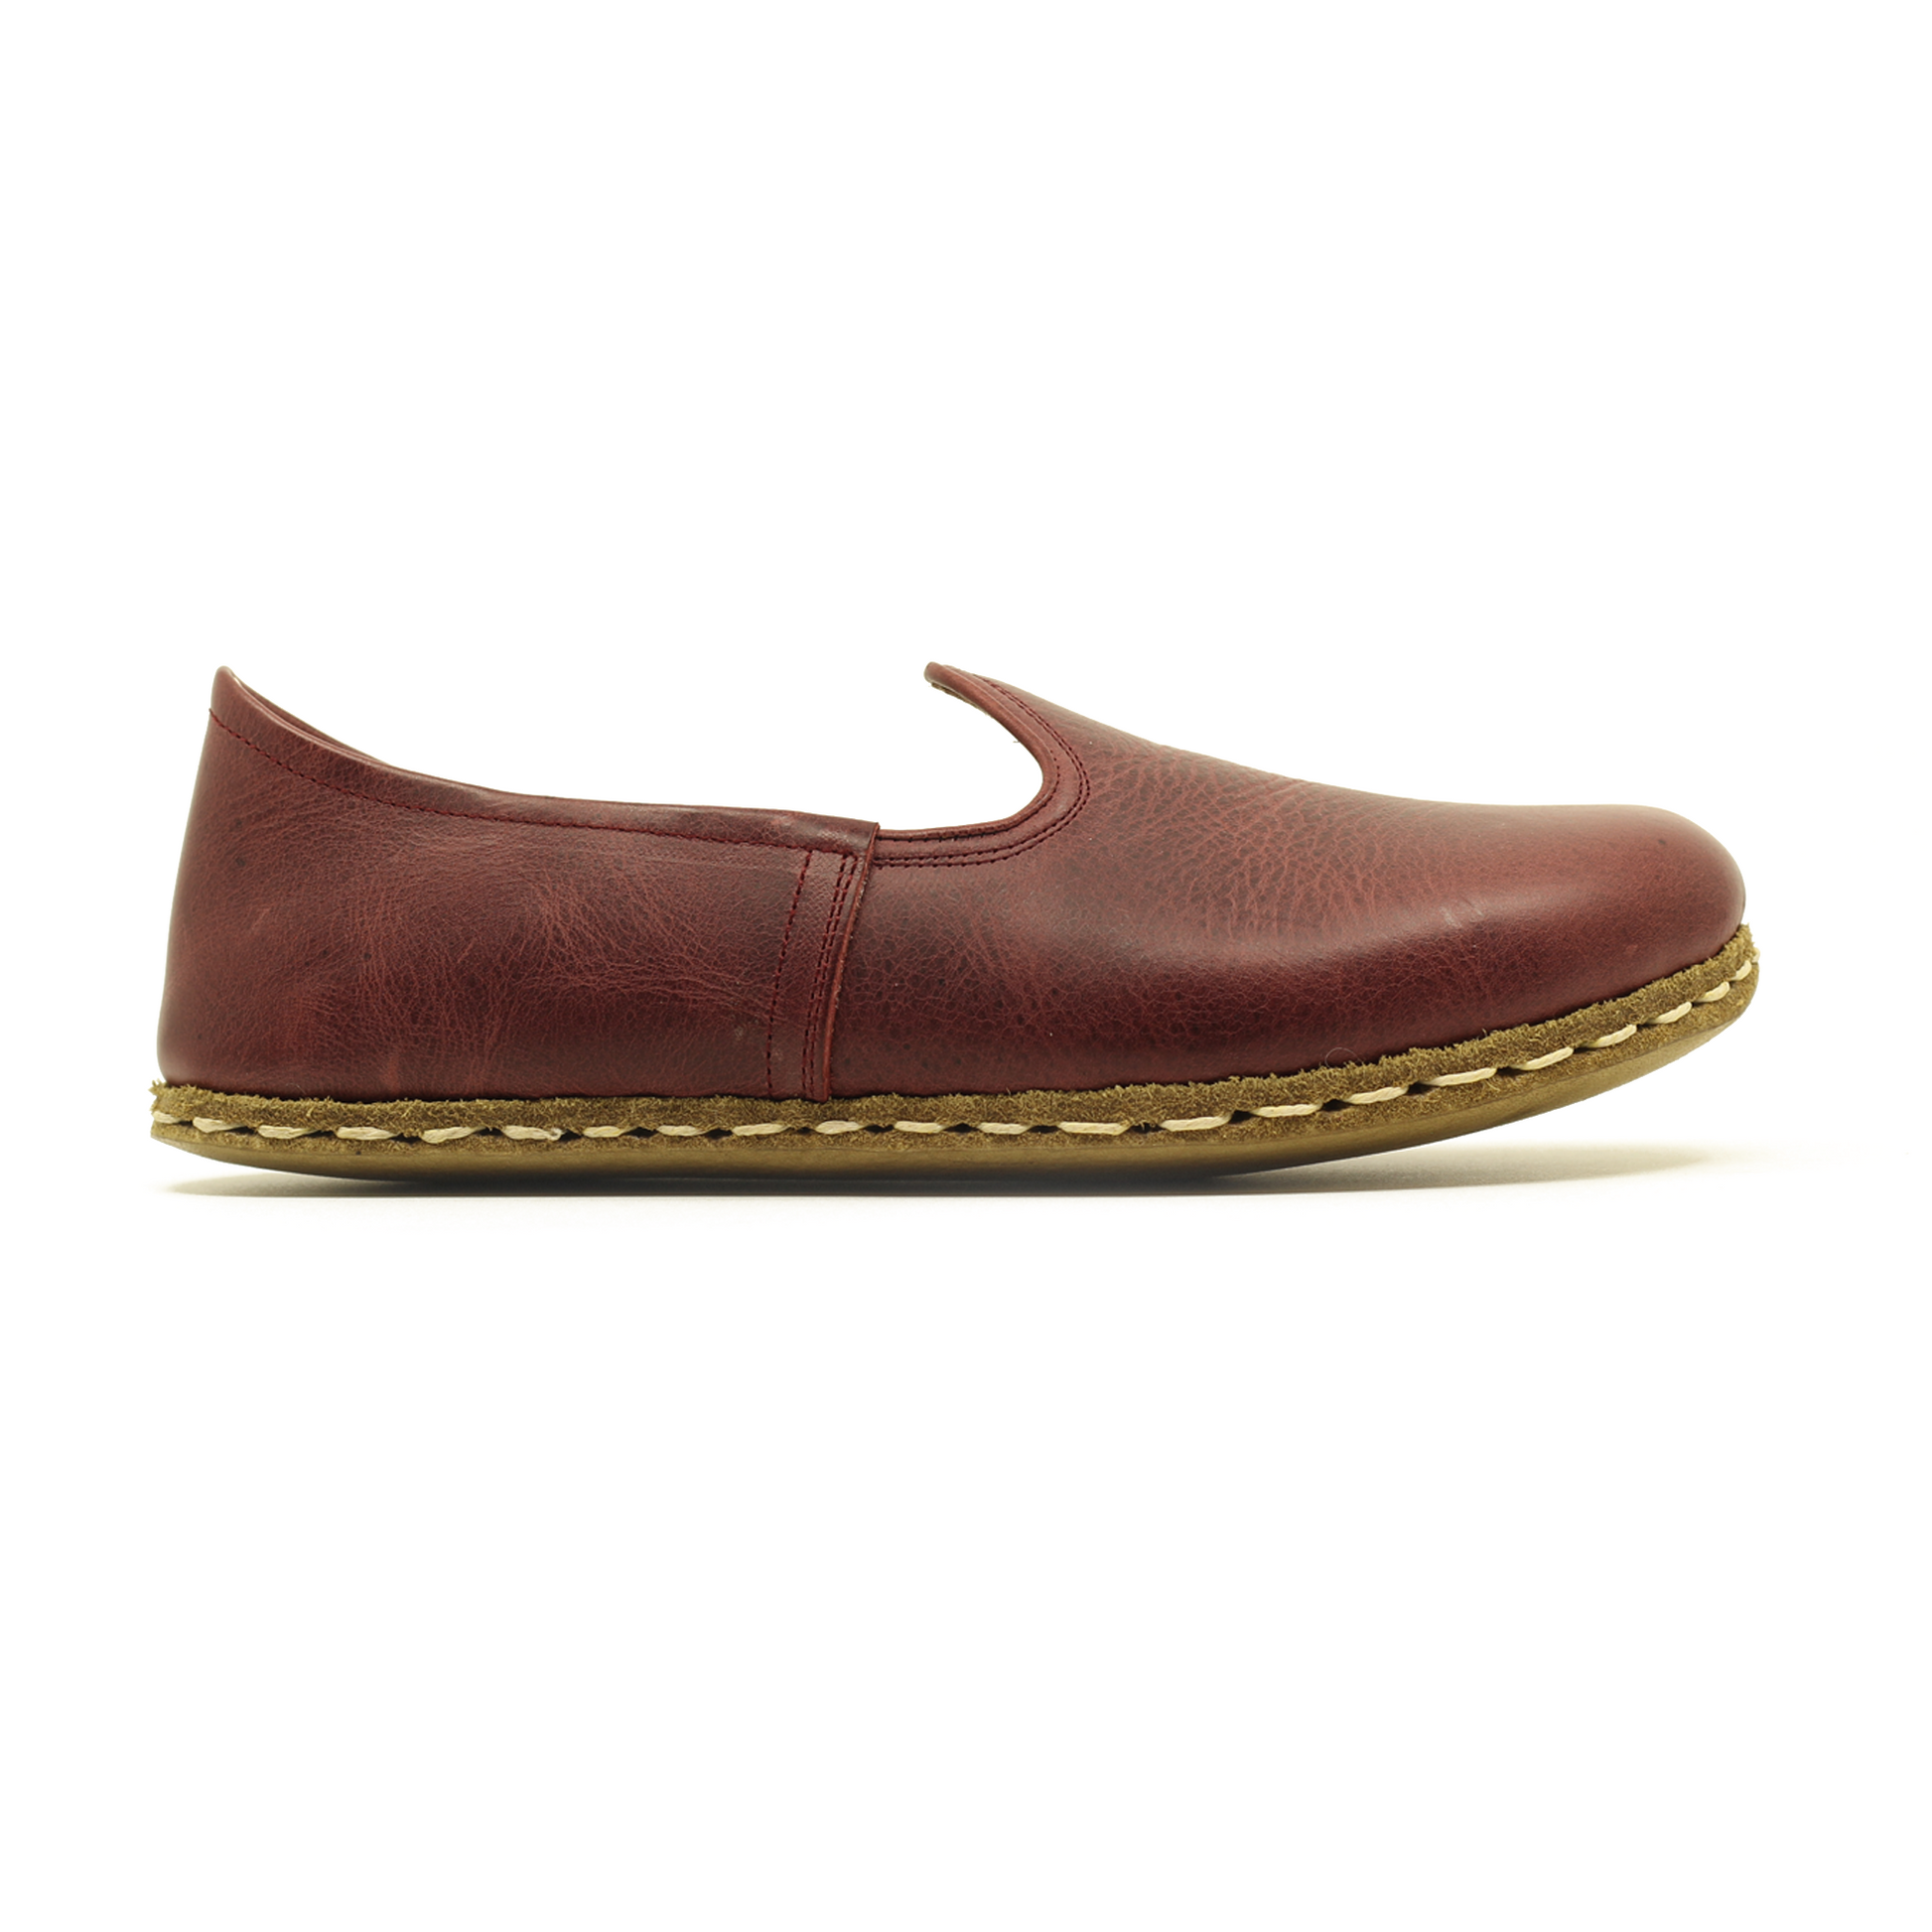 Burgundy Barefoot Leather Shoes Flat for Women-Women Barefoot Shoes Classic-nefesshoes-3-Nefes Shoes